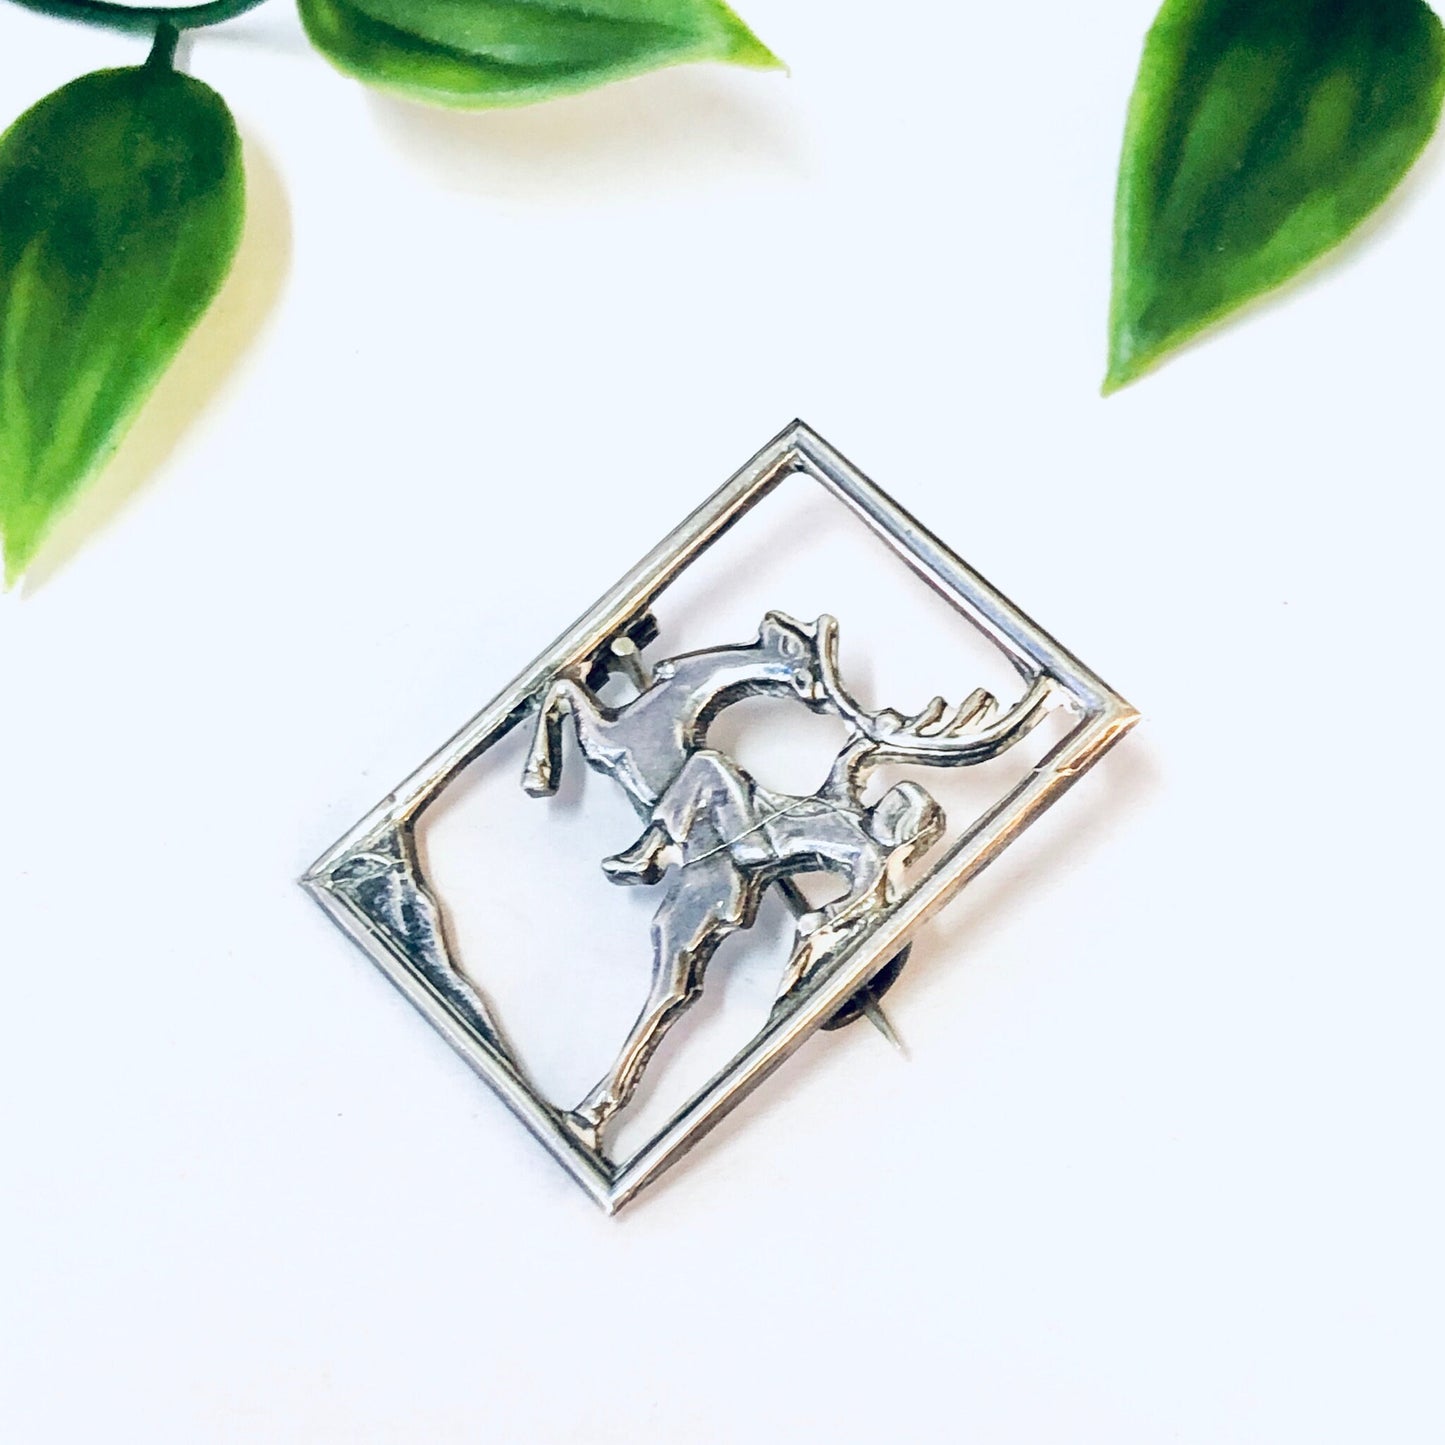 Vintage silver deer brooch featuring a cut-out design with a man riding the deer, surrounded by green leaves on a white background.